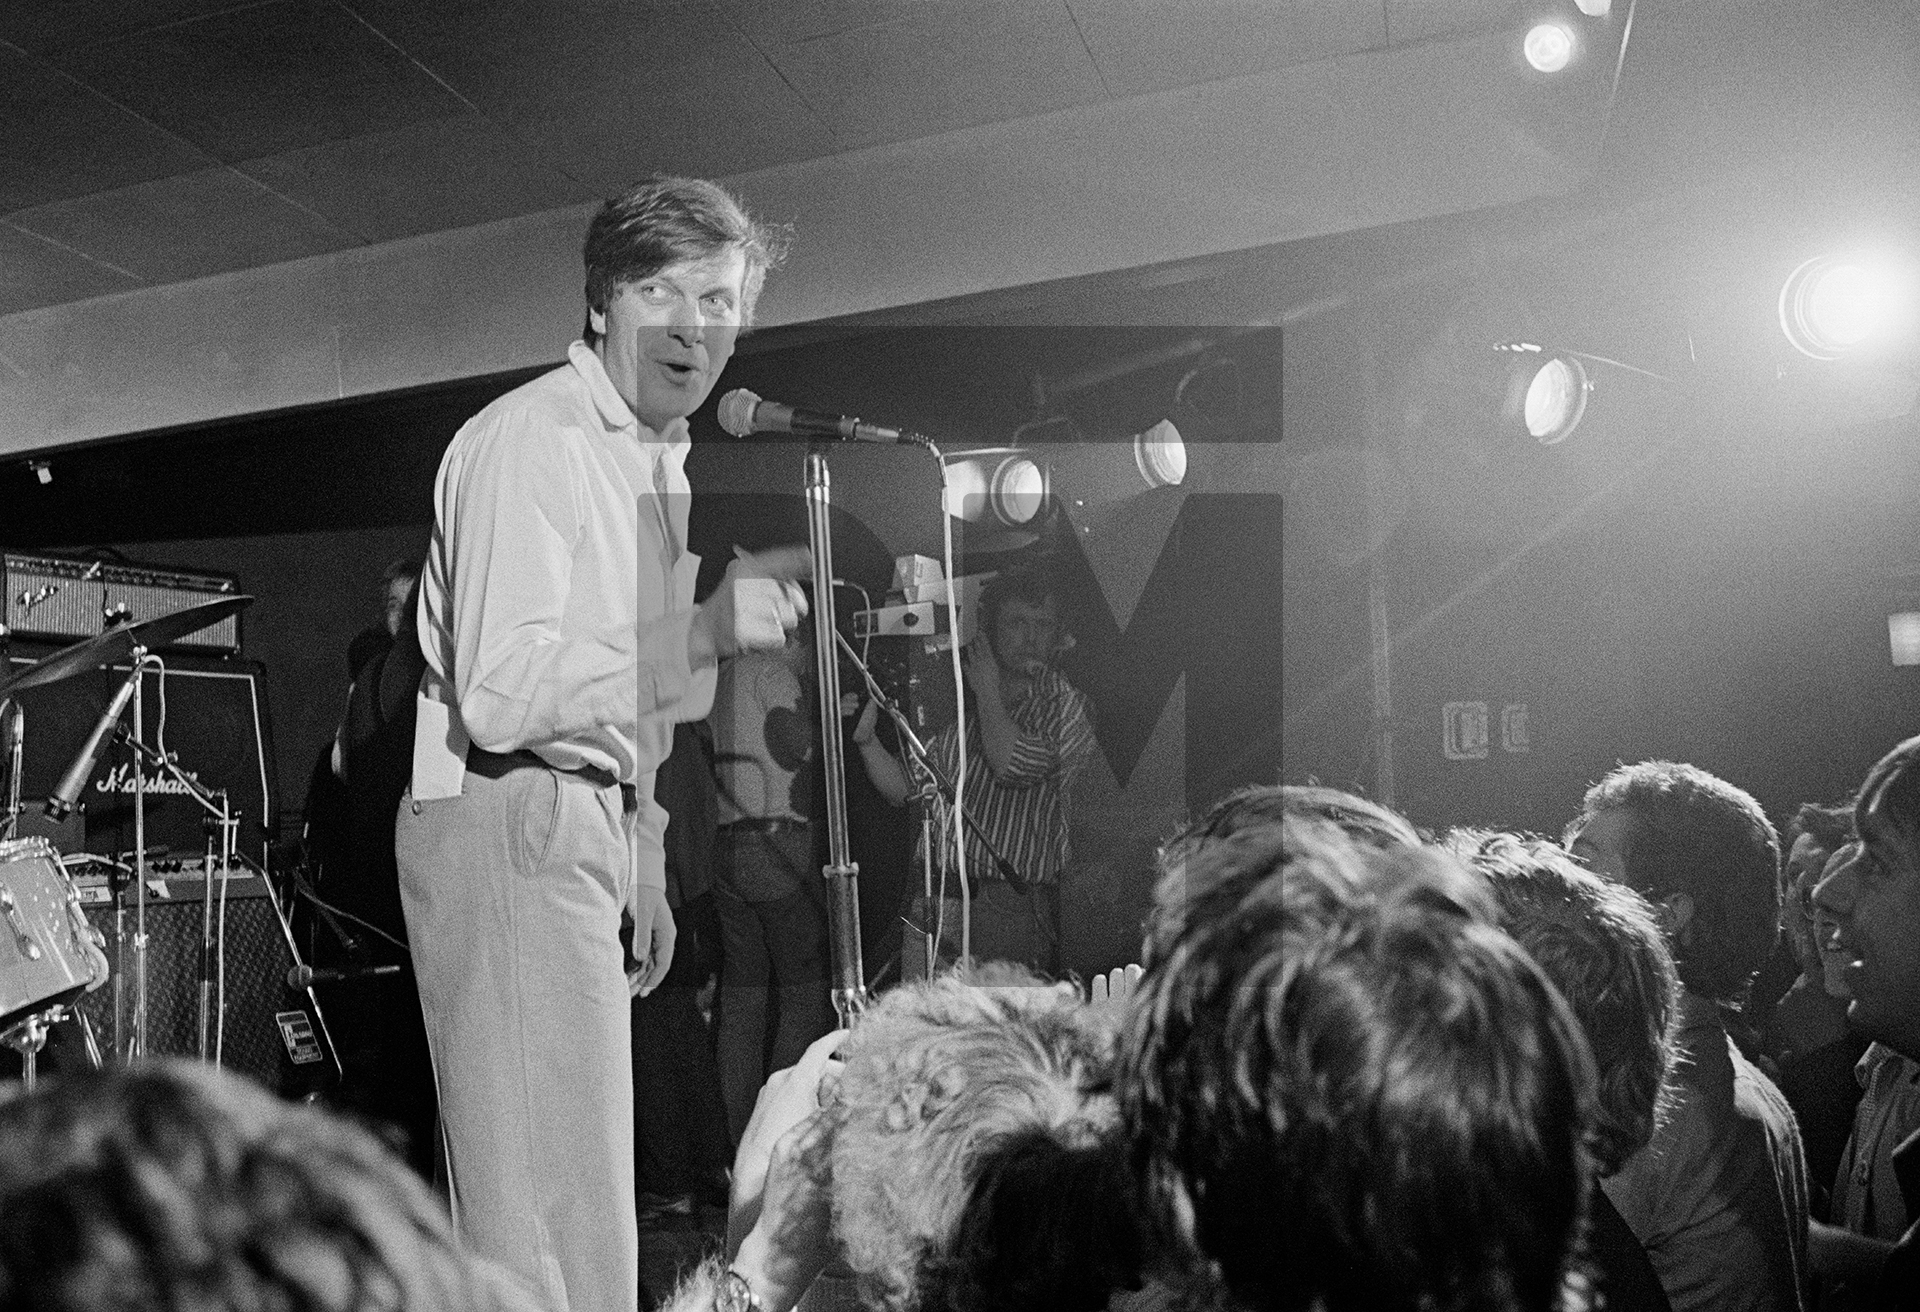 Tony Wilson at the Russell Club for a ‘Factory’ night. ‘What's On’ from Granada TV on location, Hulme, Manchester. April 1979 by Daniel Meadows